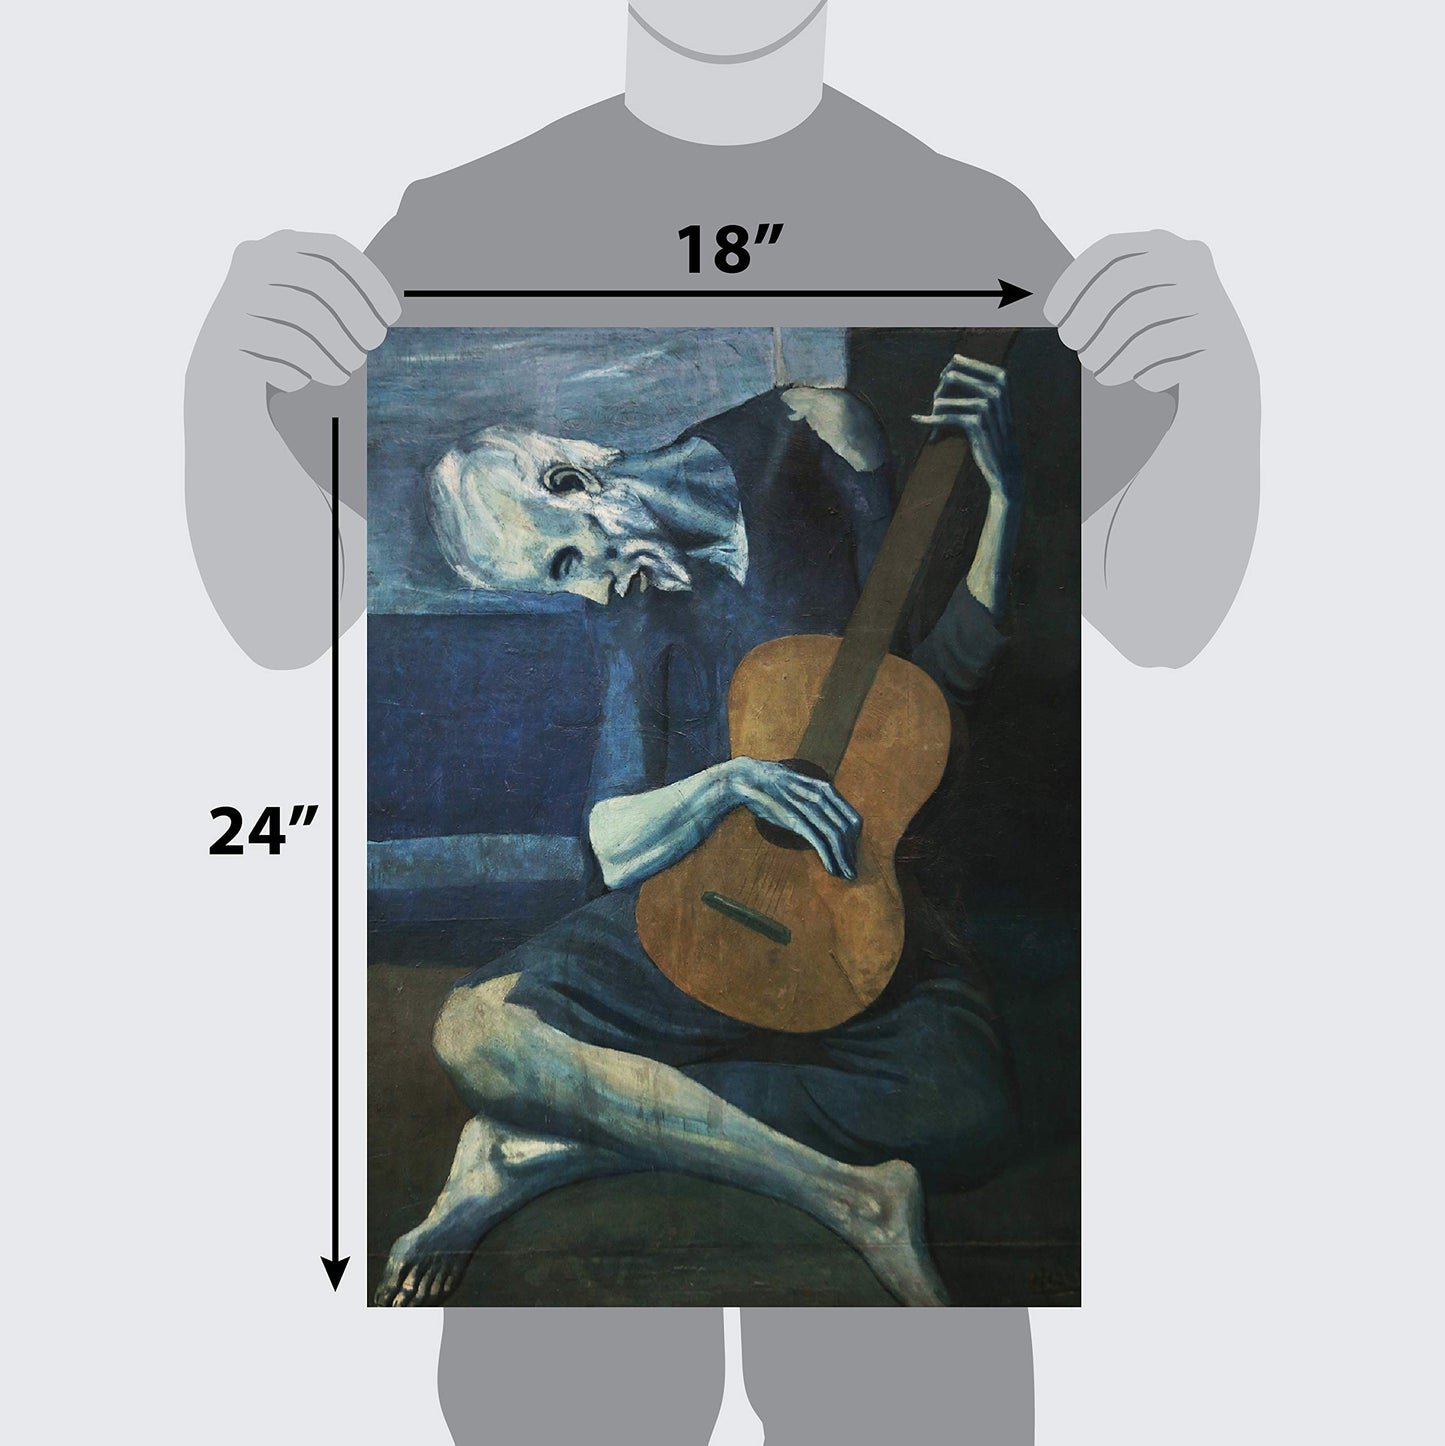 3 Pack: Vincent Van Gogh Skeleton + Starry Night + The Old Guitarist by Pablo Picasso Poster Set - Set of 3 Fine Art Prints (LAMINATED, 18" x 24")